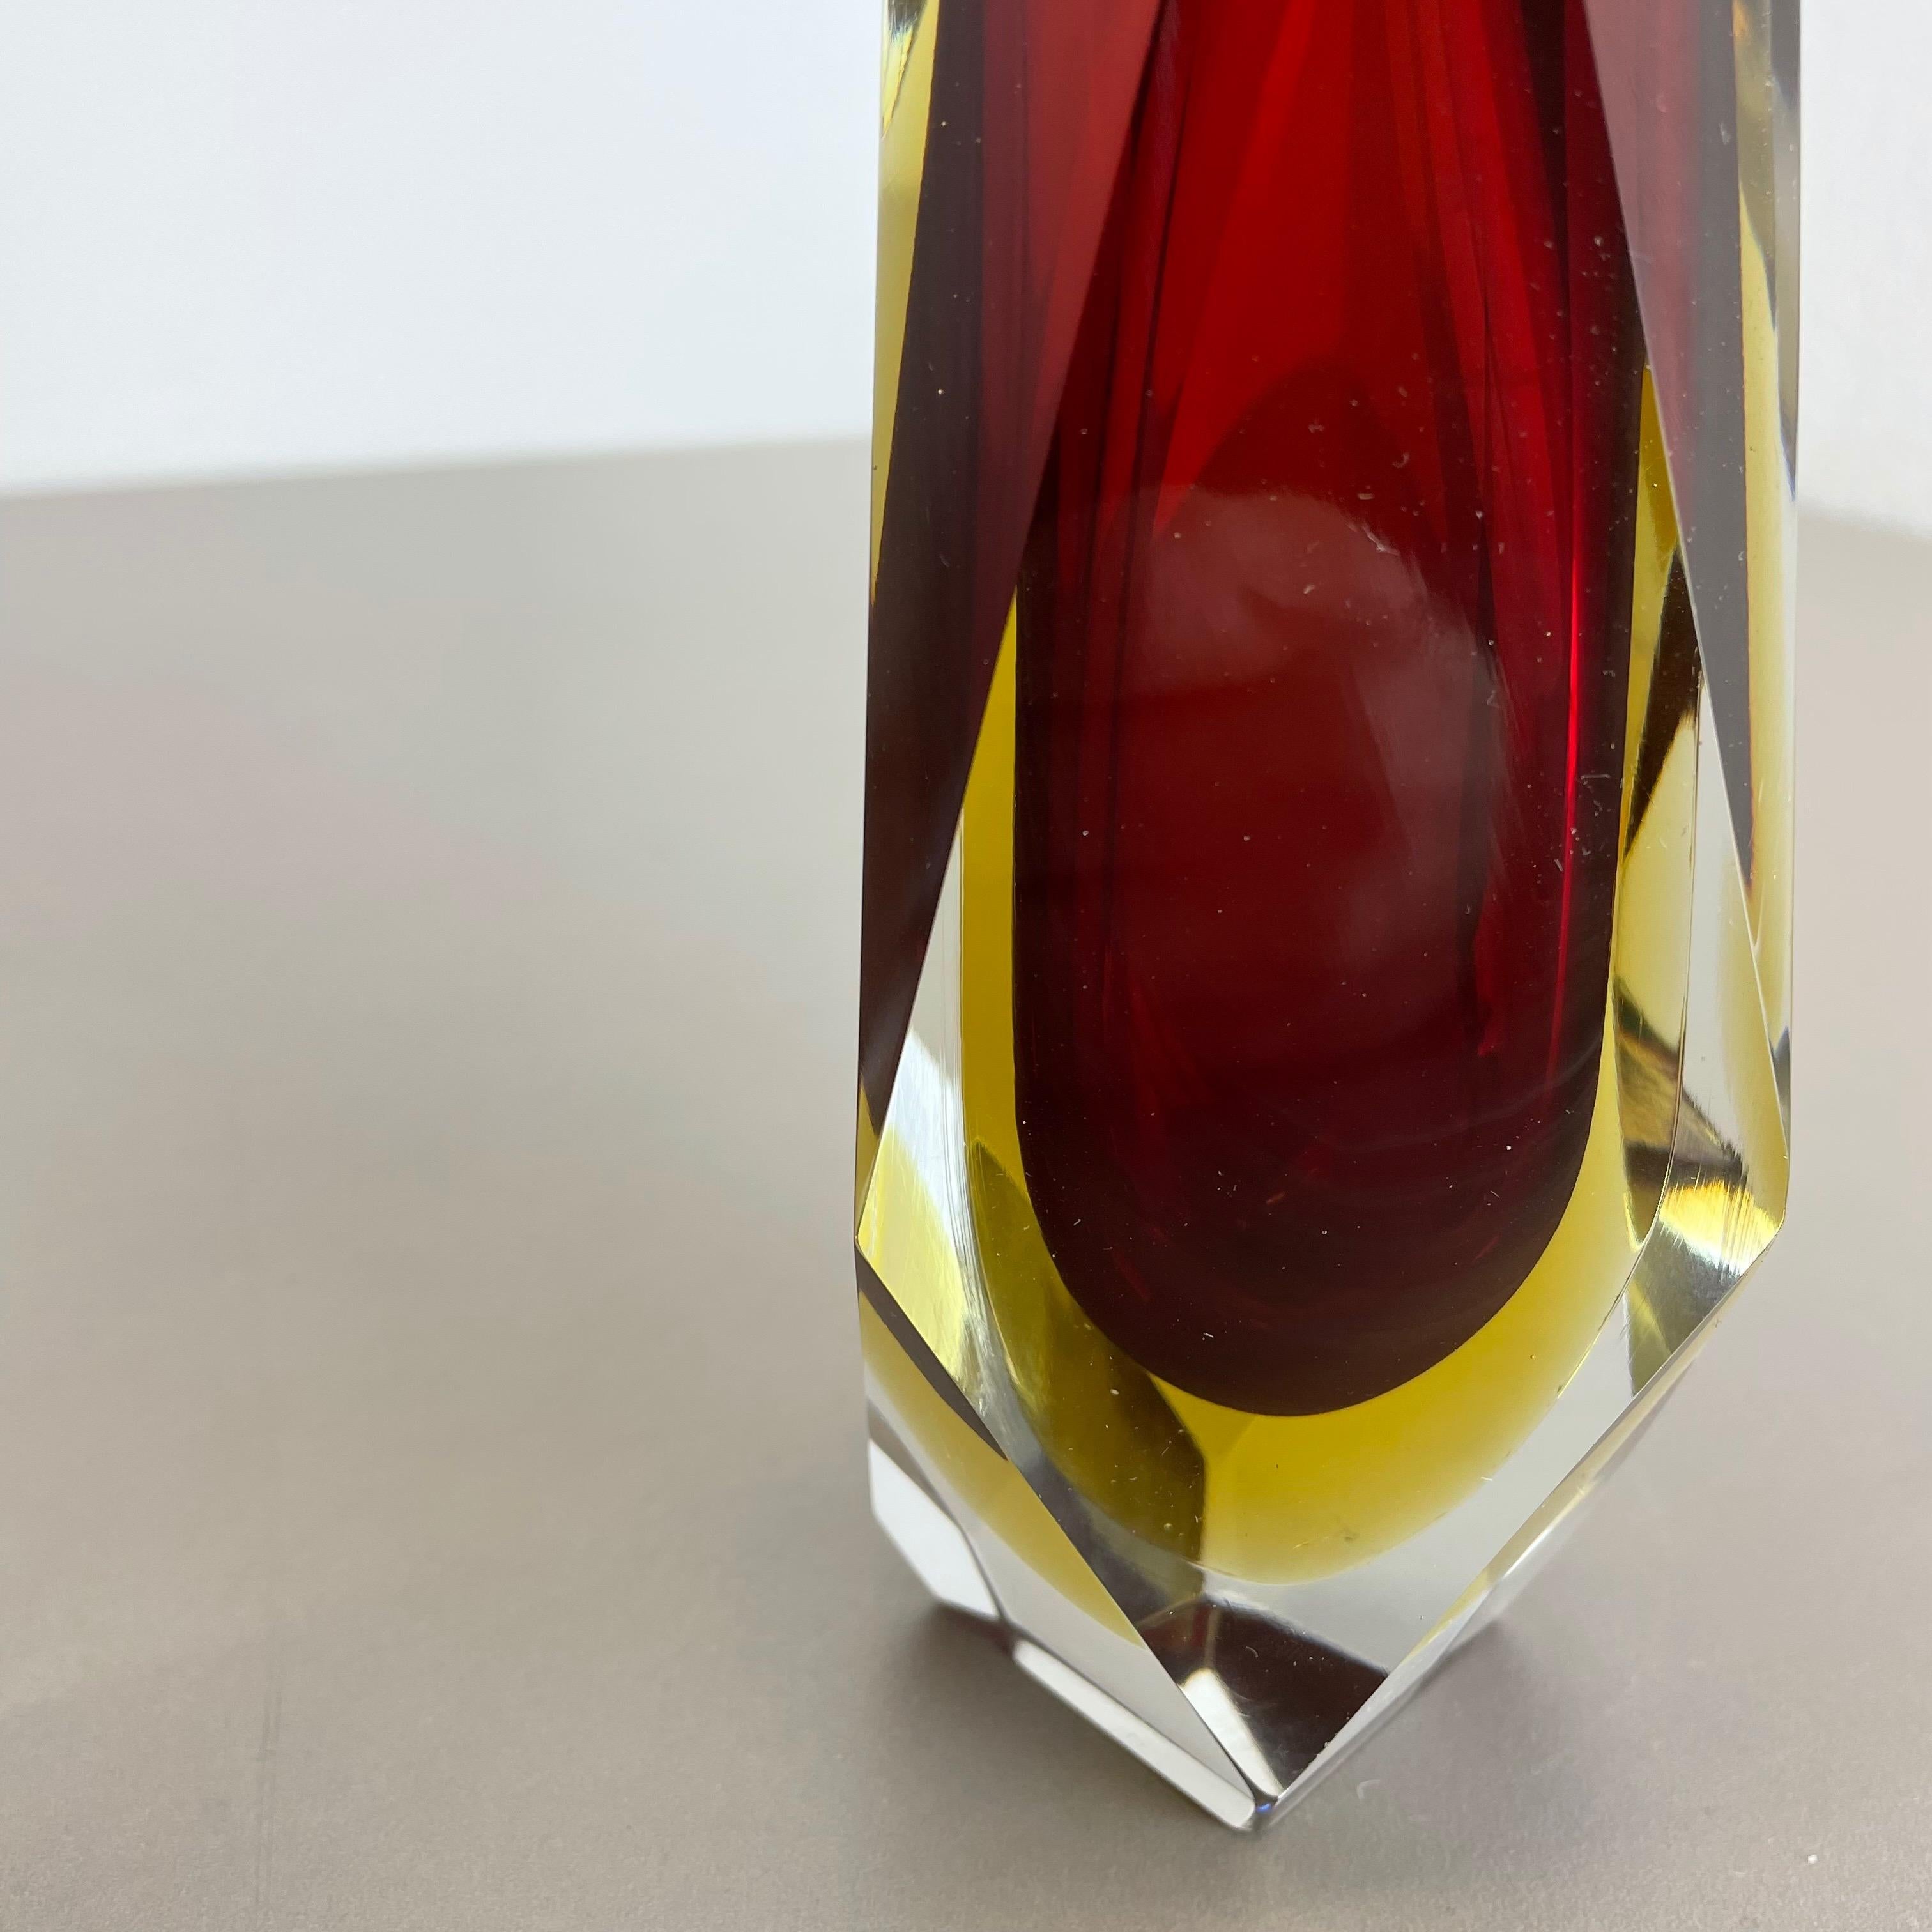 Set of 2 Faceted Murano Glass Sommerso Vase Designed by Flavio Poli Italy, 1970s For Sale 12